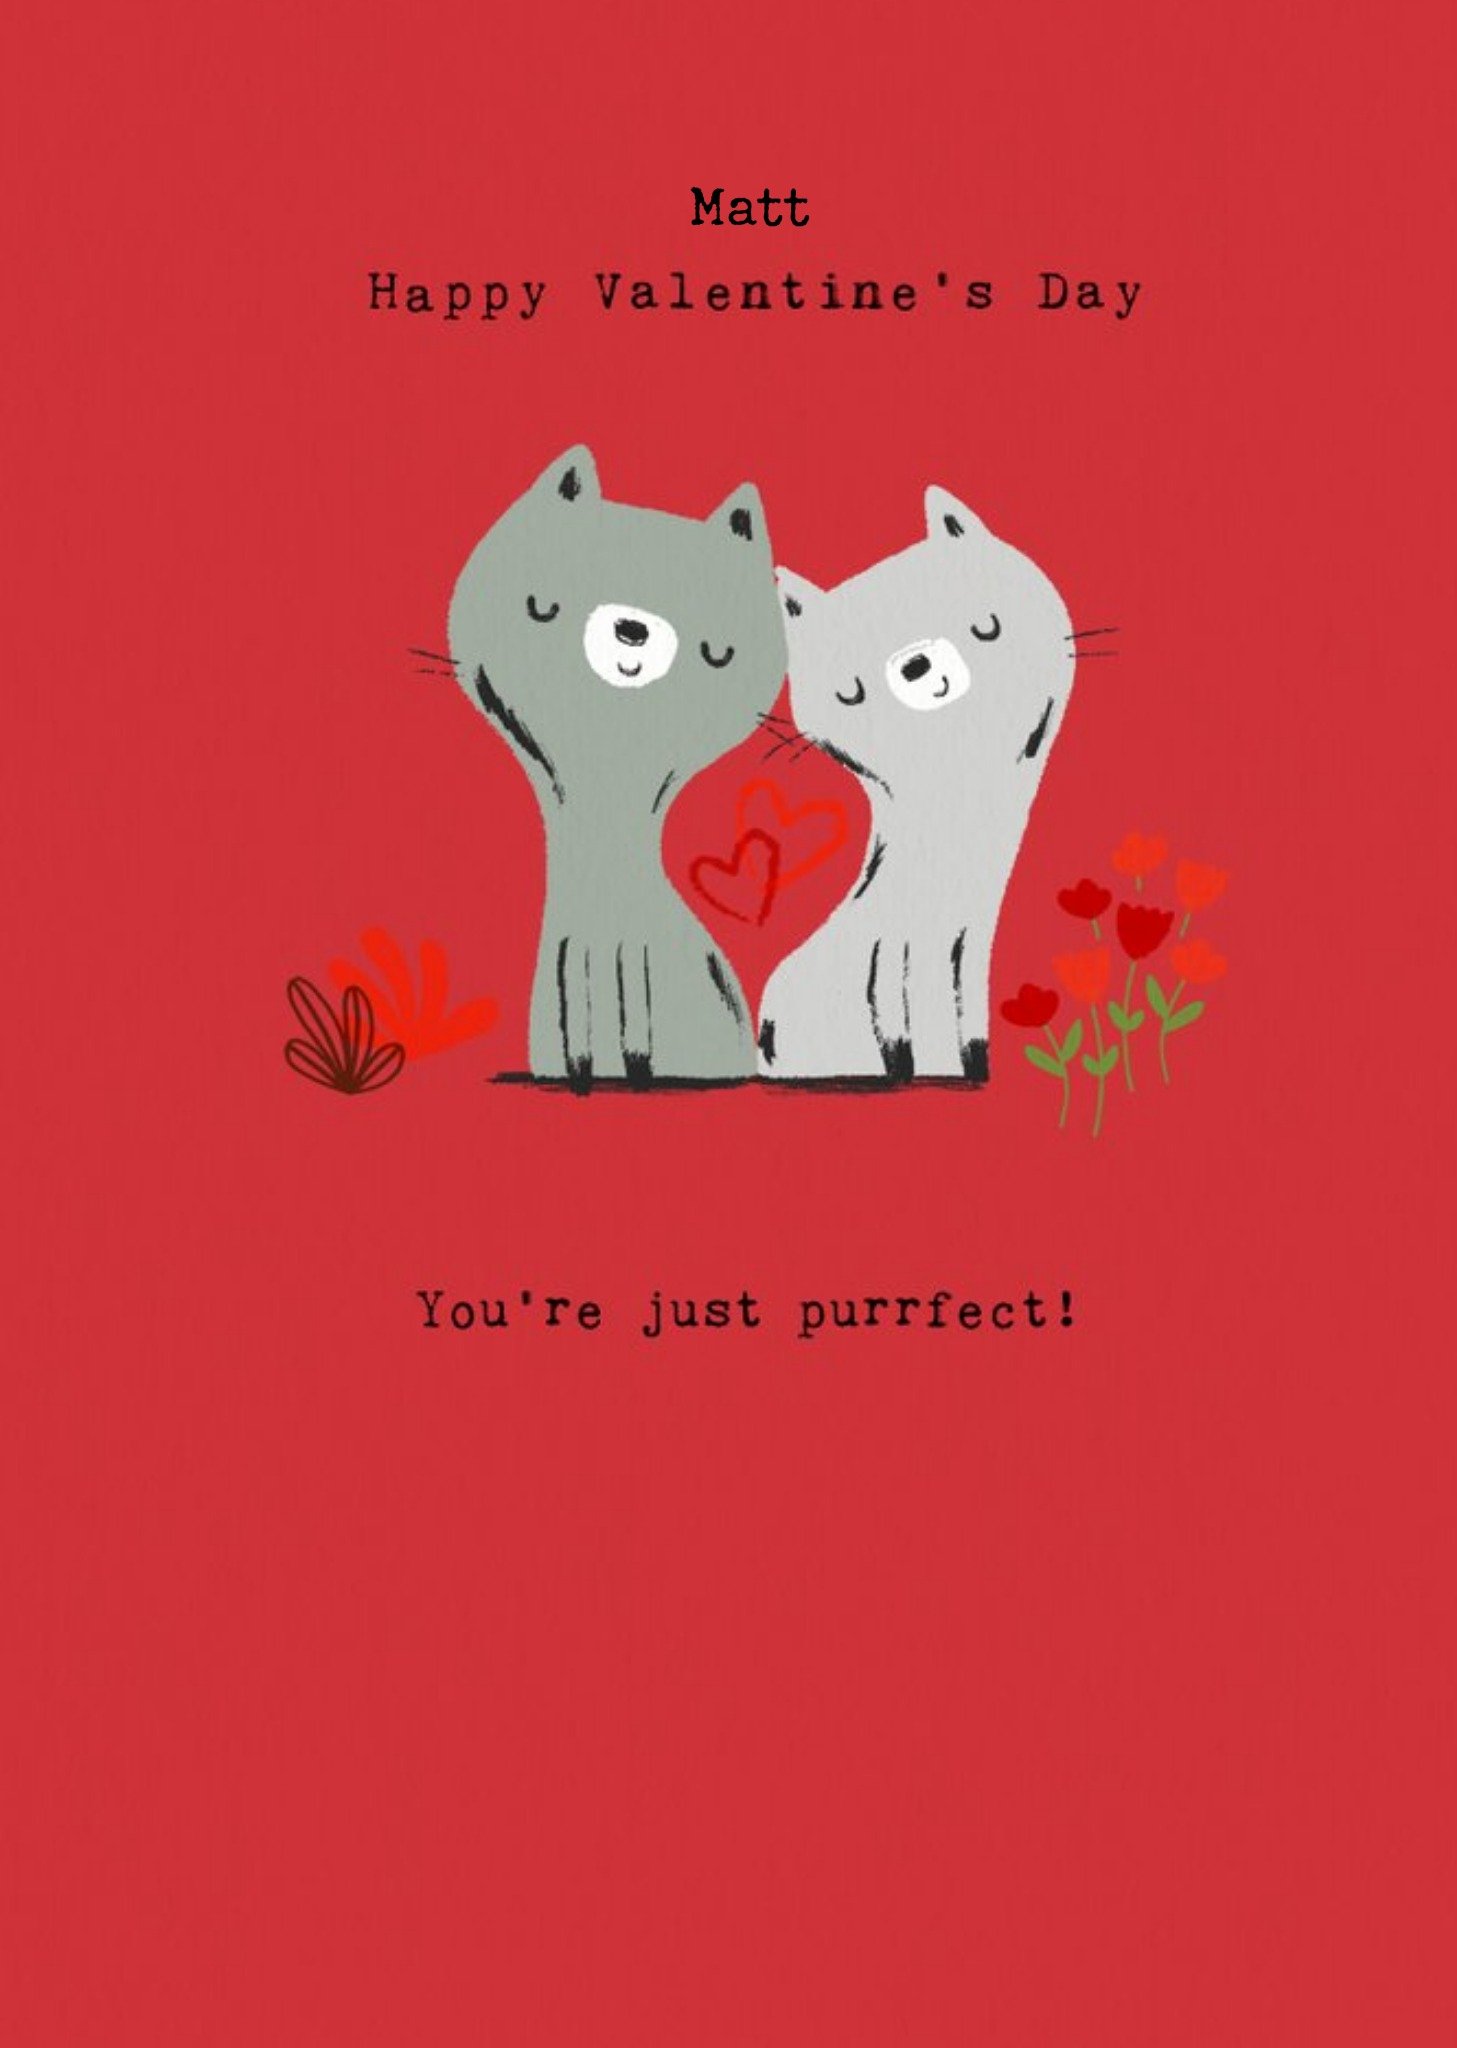 Moonpig Cute Illustration Of Two Cats With Two Lovehearts You're Just Purrfect Valentine's Day Card,